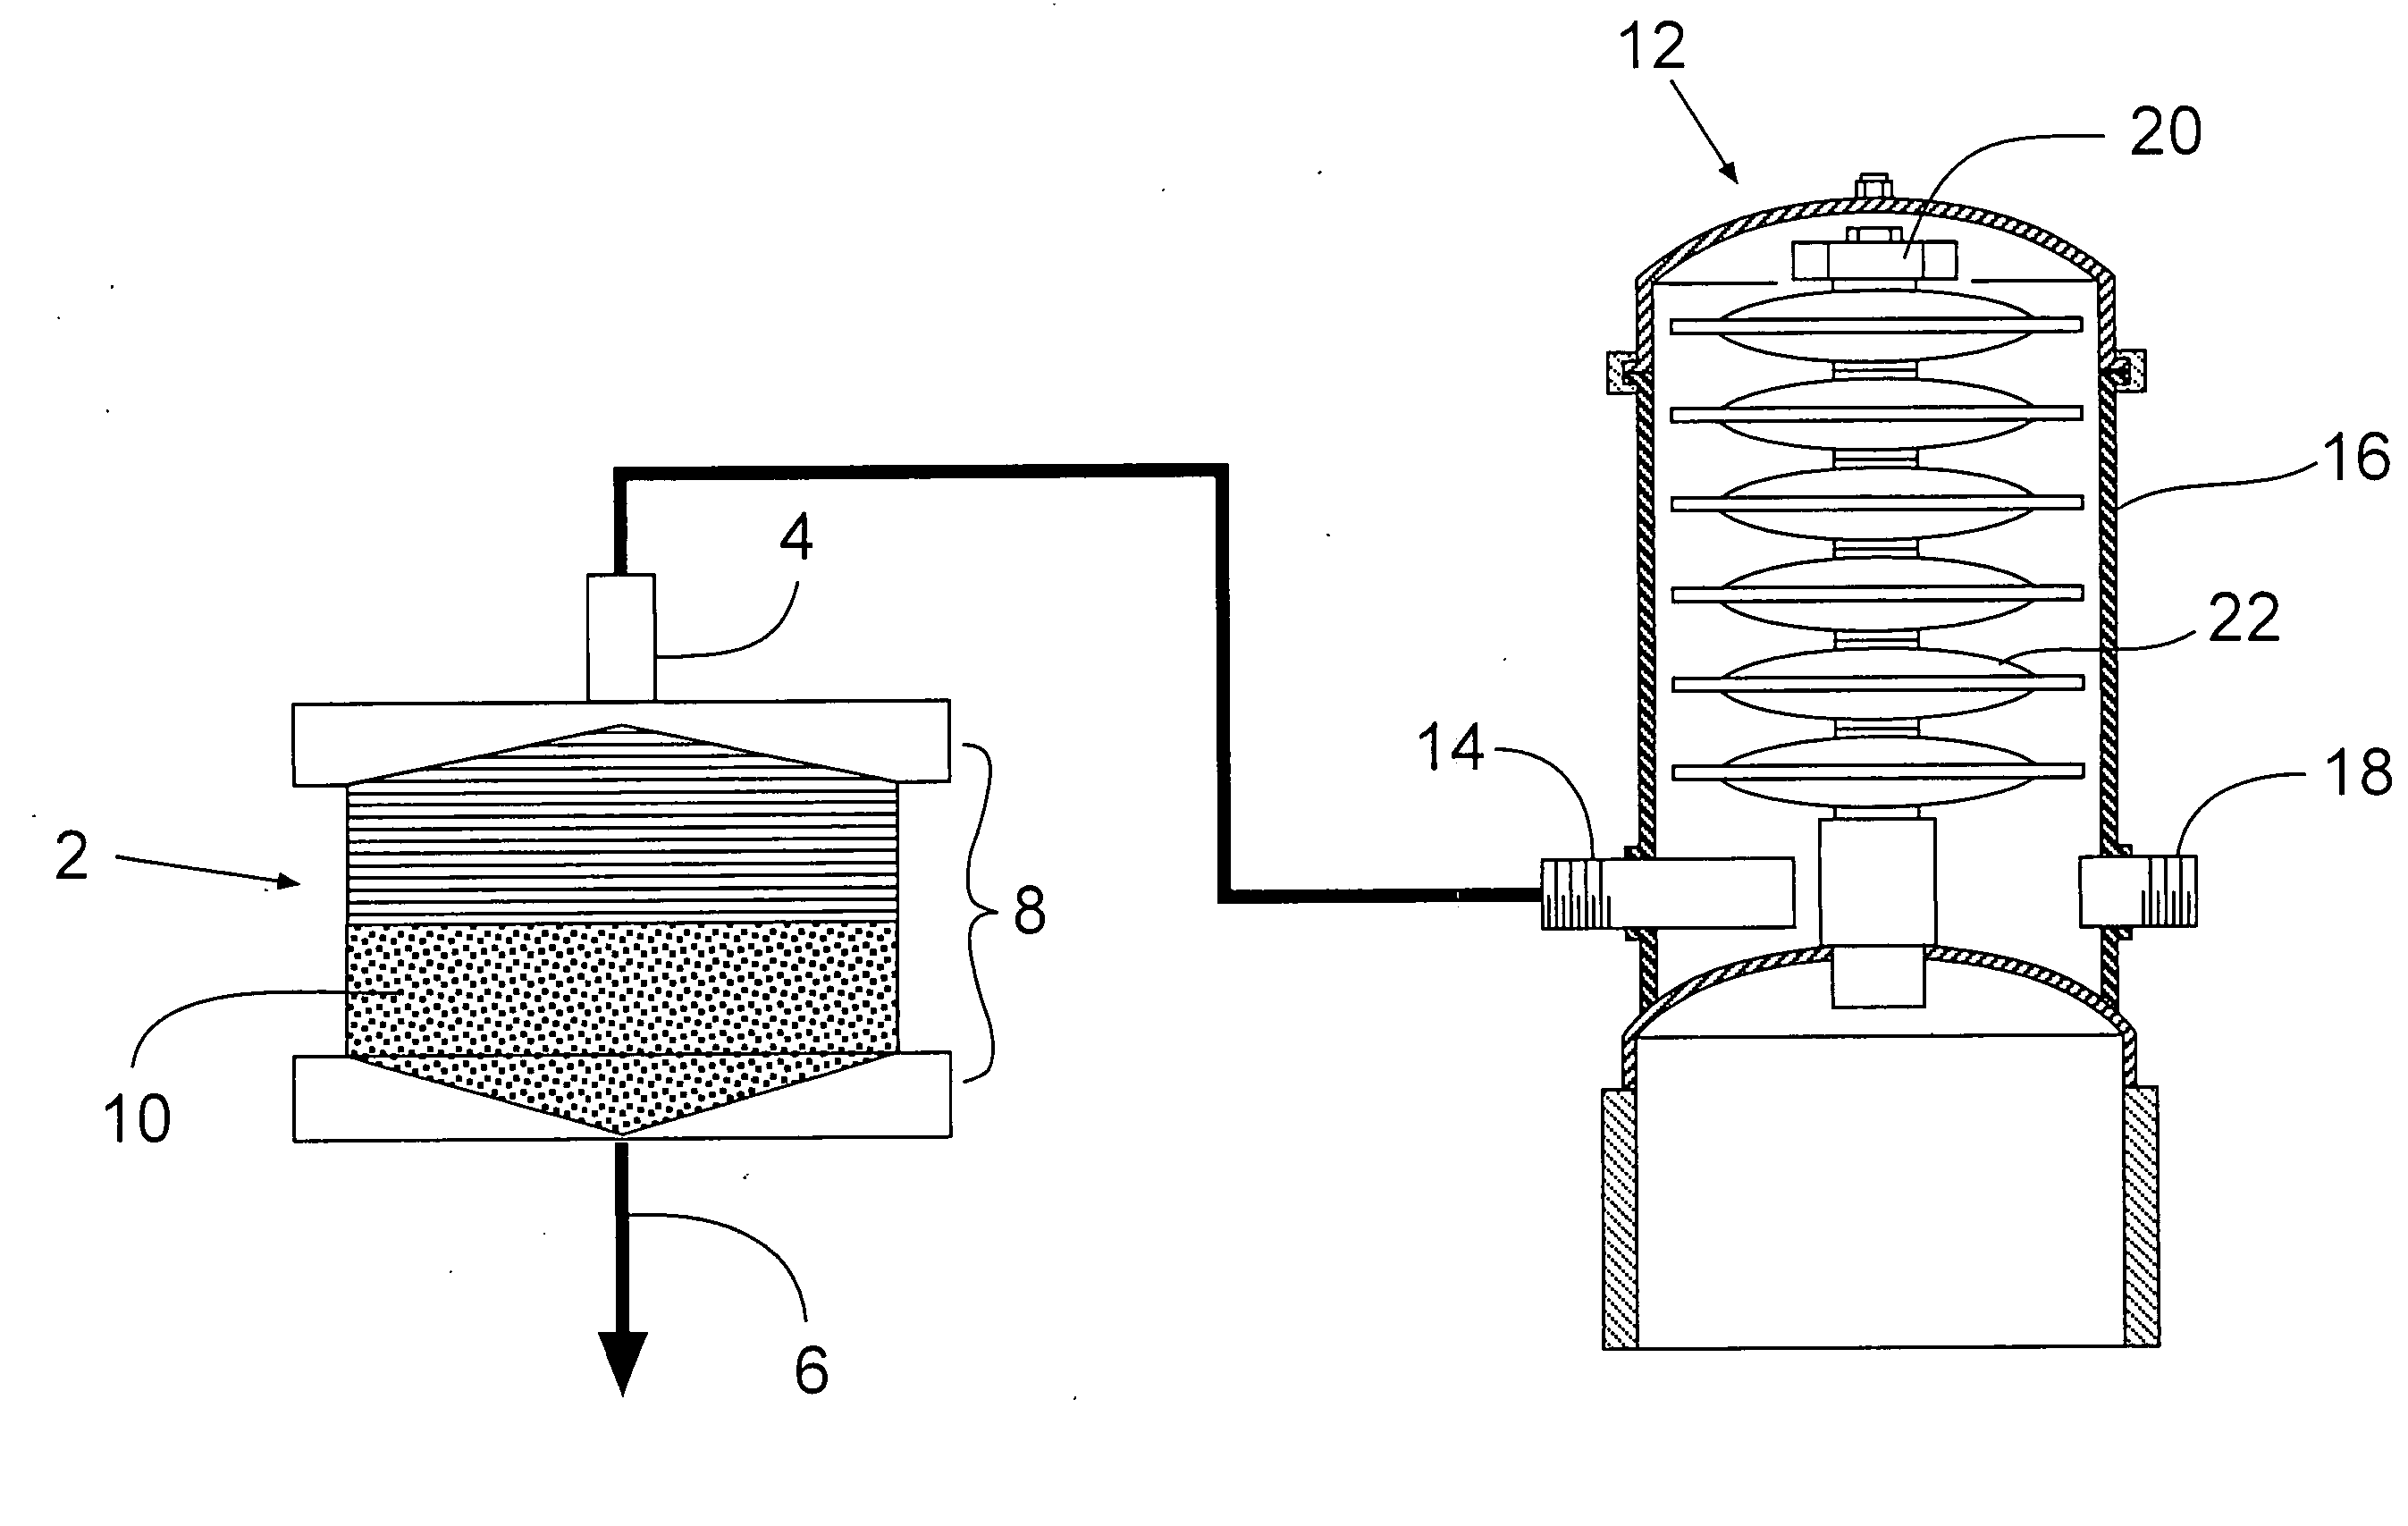 Prefilter system for biological systems